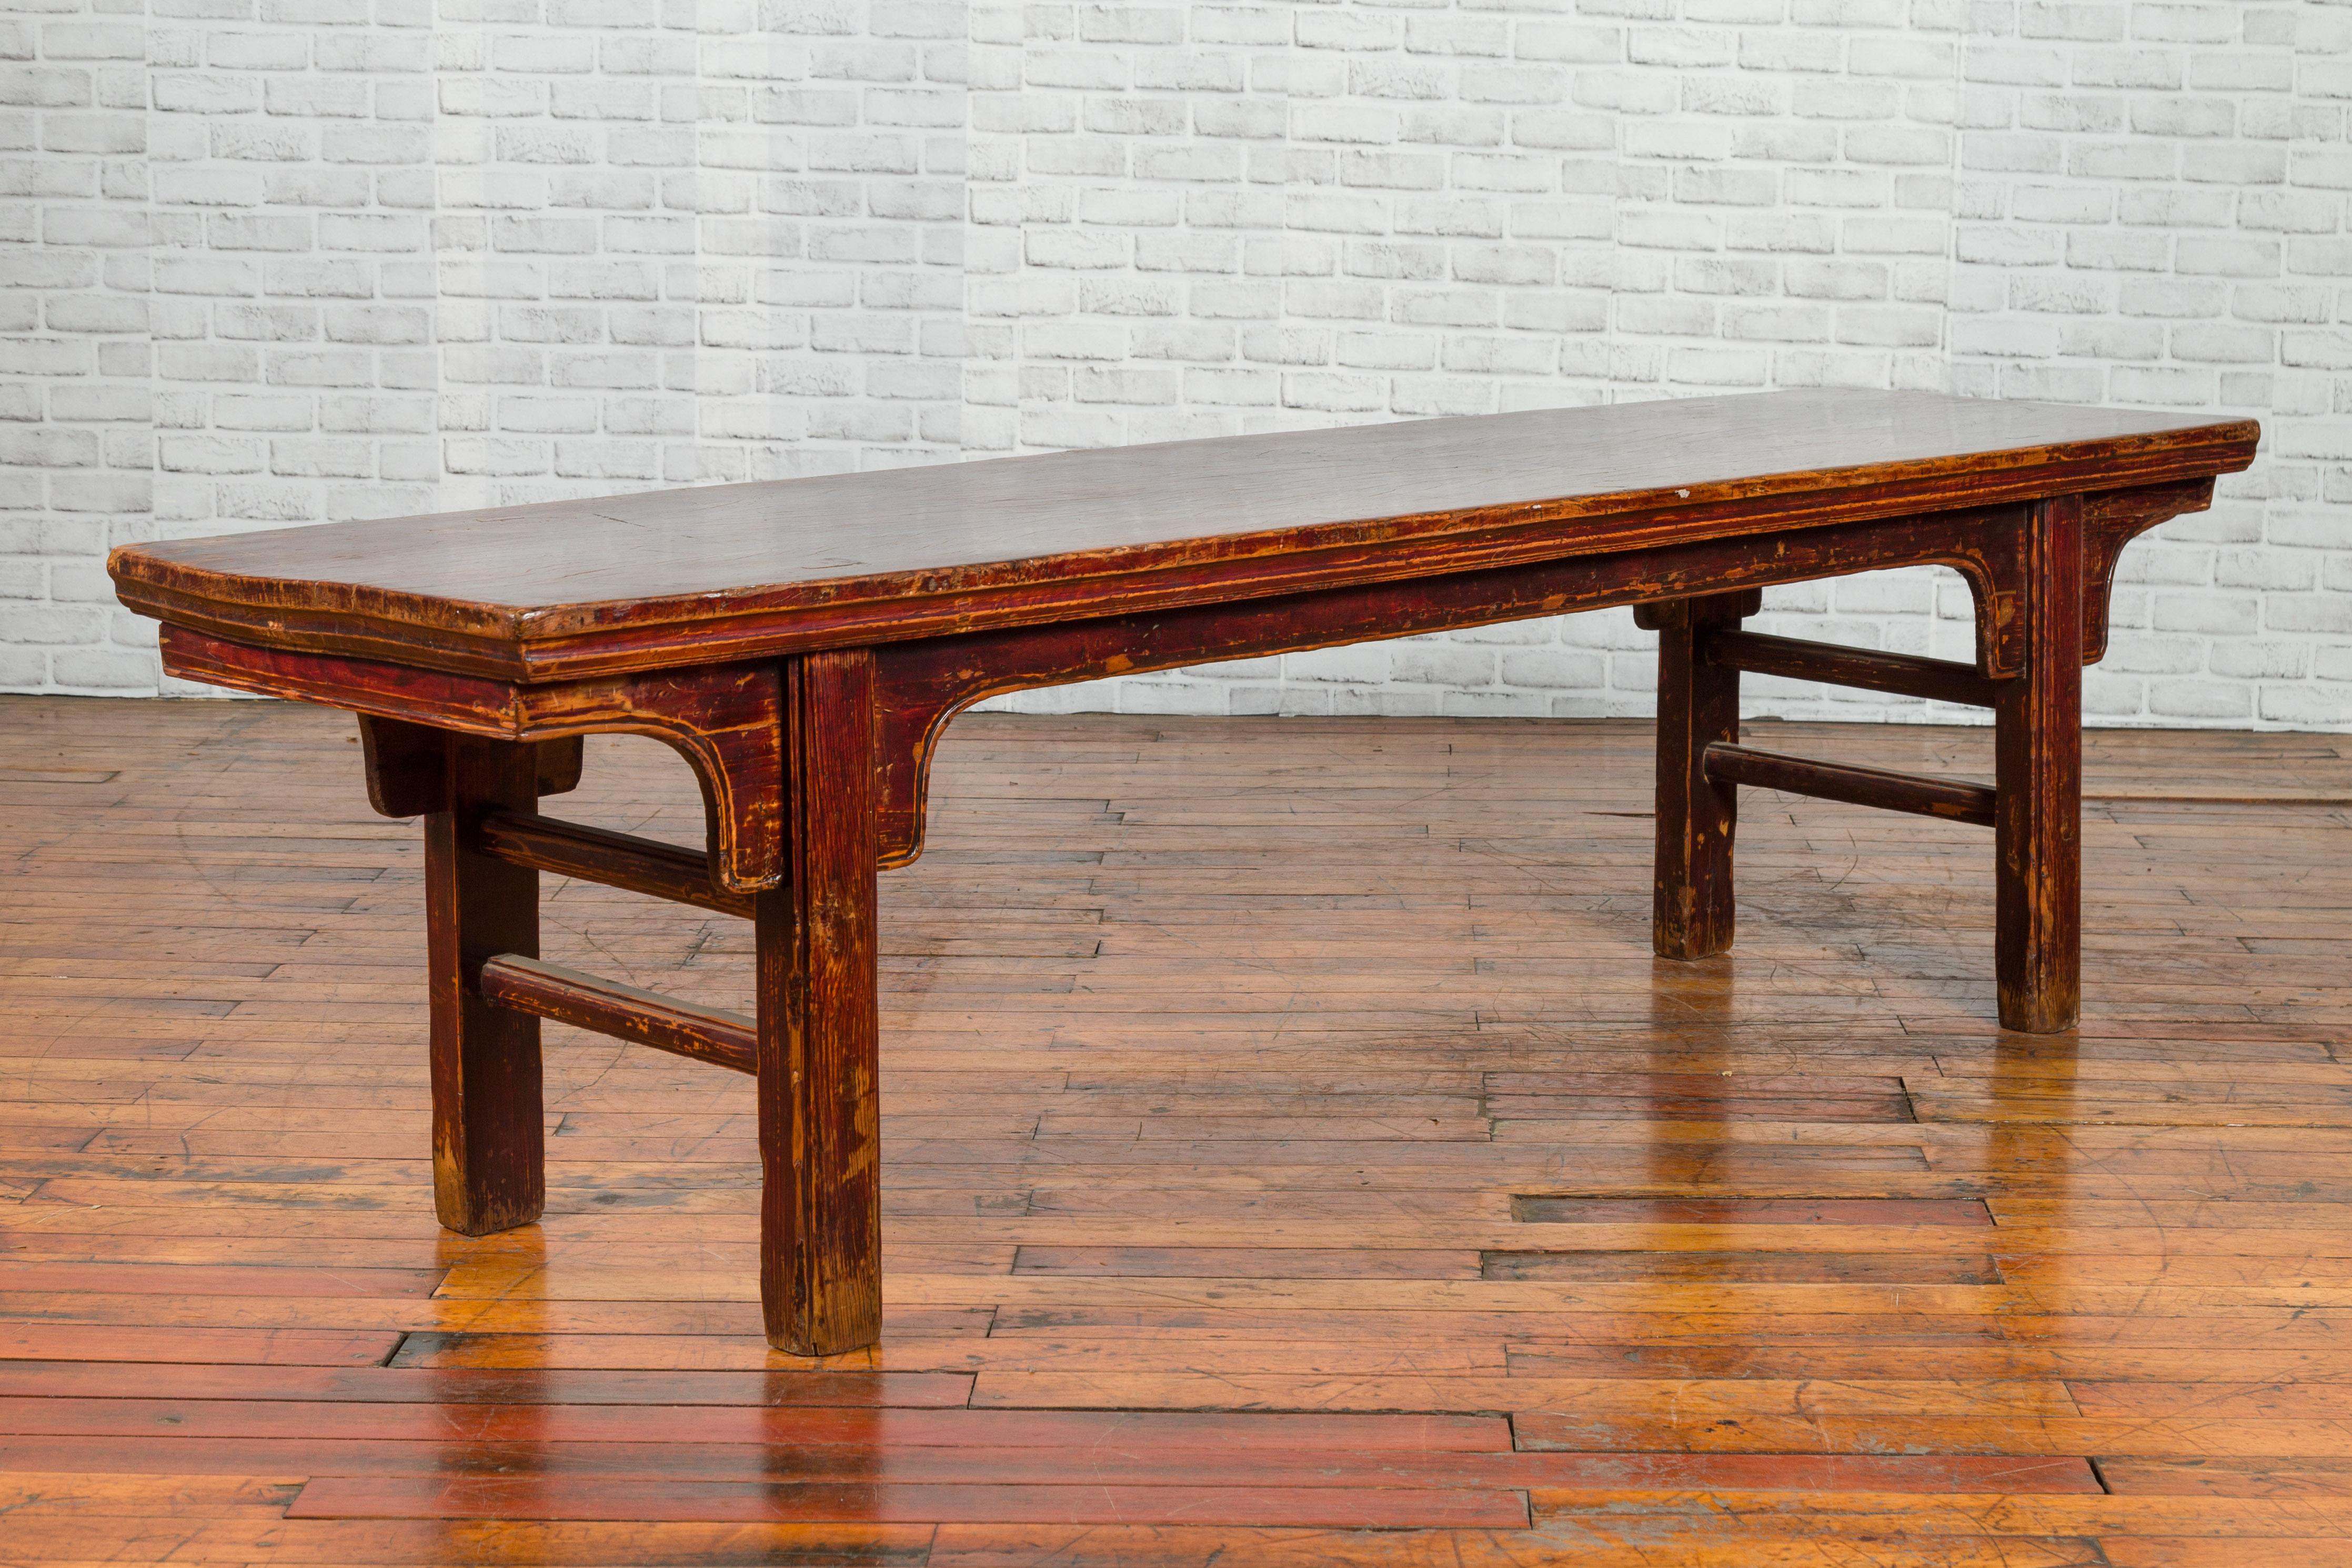 Chinese 19th Century Qing Dynasty Coffee Table with Distressed Patina In Good Condition For Sale In Yonkers, NY